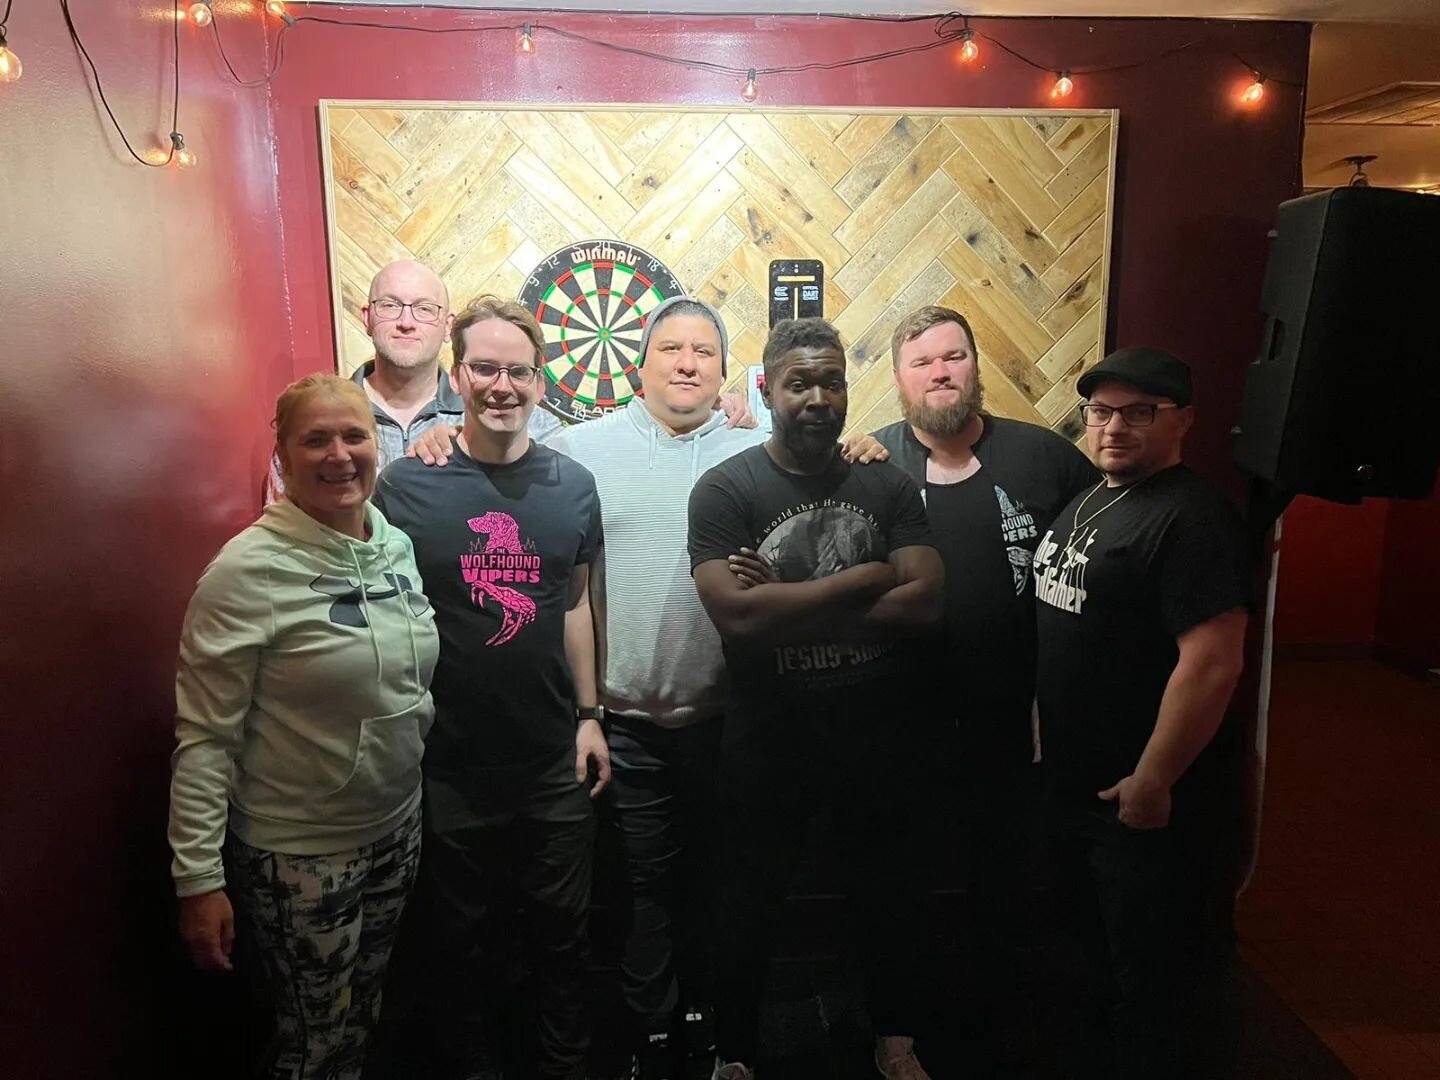 Congratulations to your NEW!!!!!!! division A darts champions of Astoria! Wolfhound Vipers 🏆🎉🎉